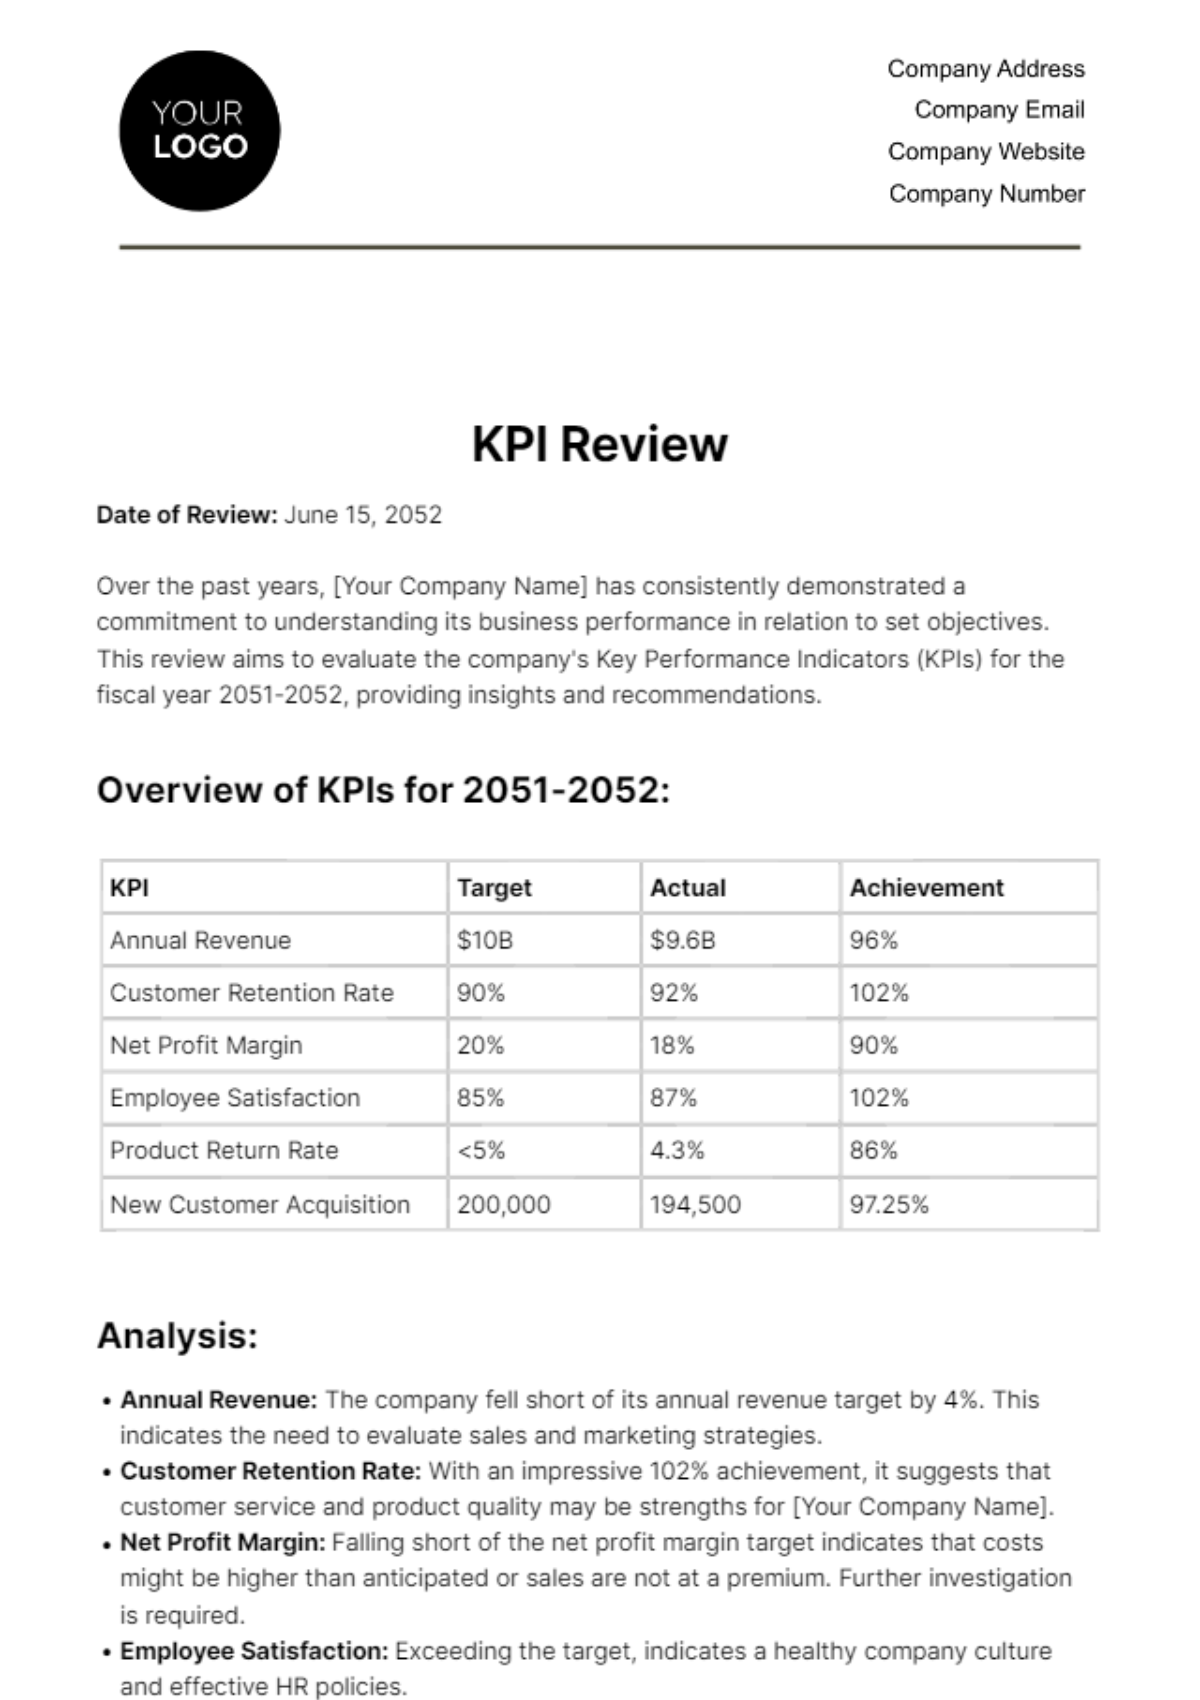 Free KPI Review HR Template